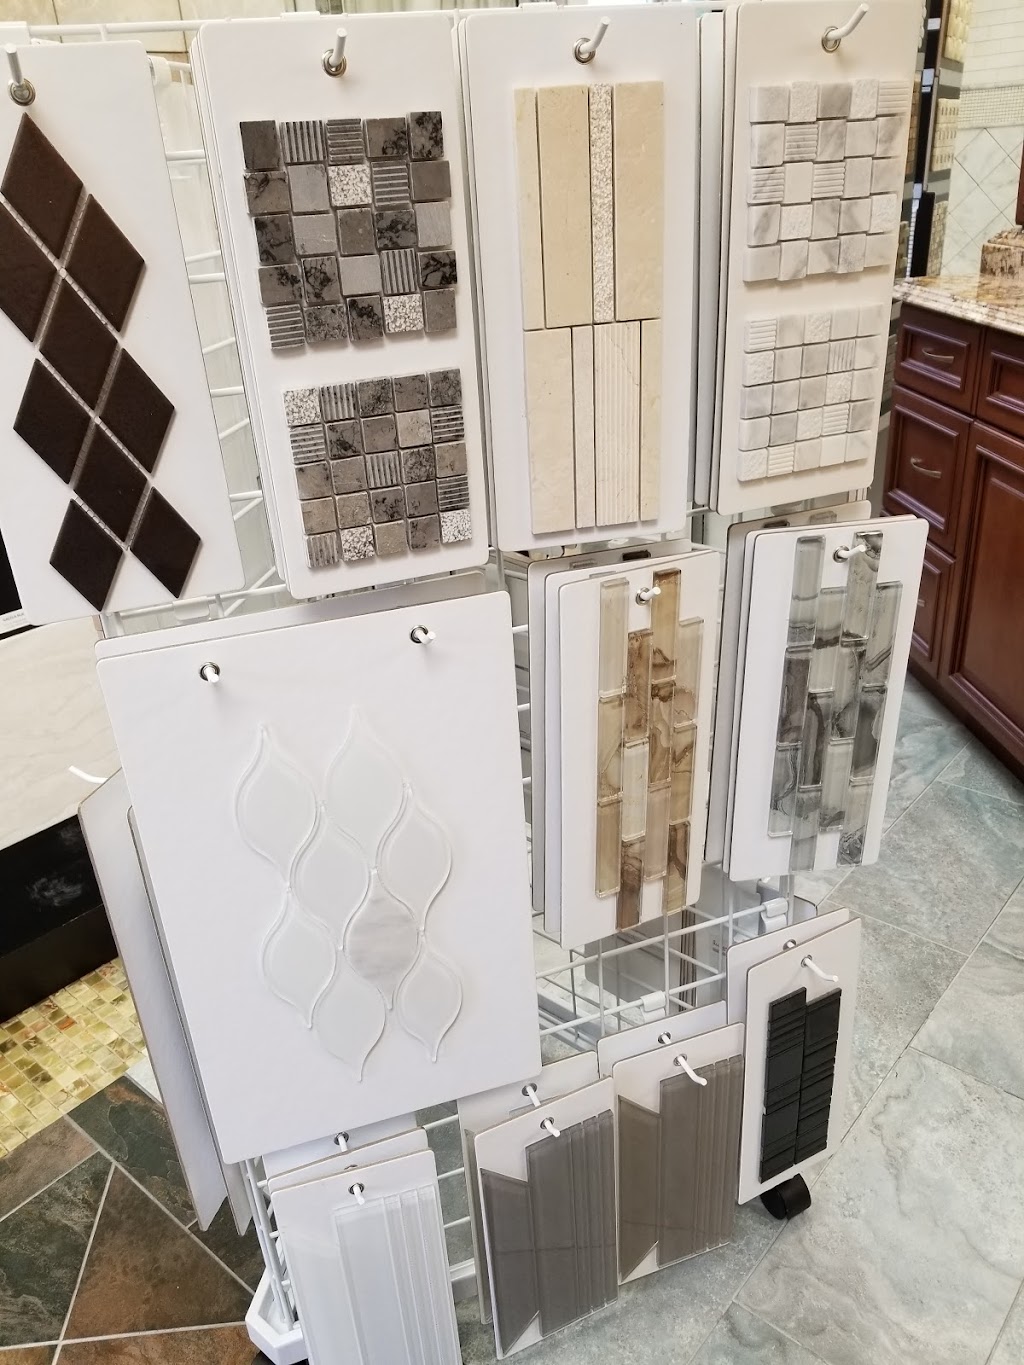 Broomall Tile & Stone | 2910 West Chester Pike, Broomall, PA 19008 | Phone: (610) 353-1010